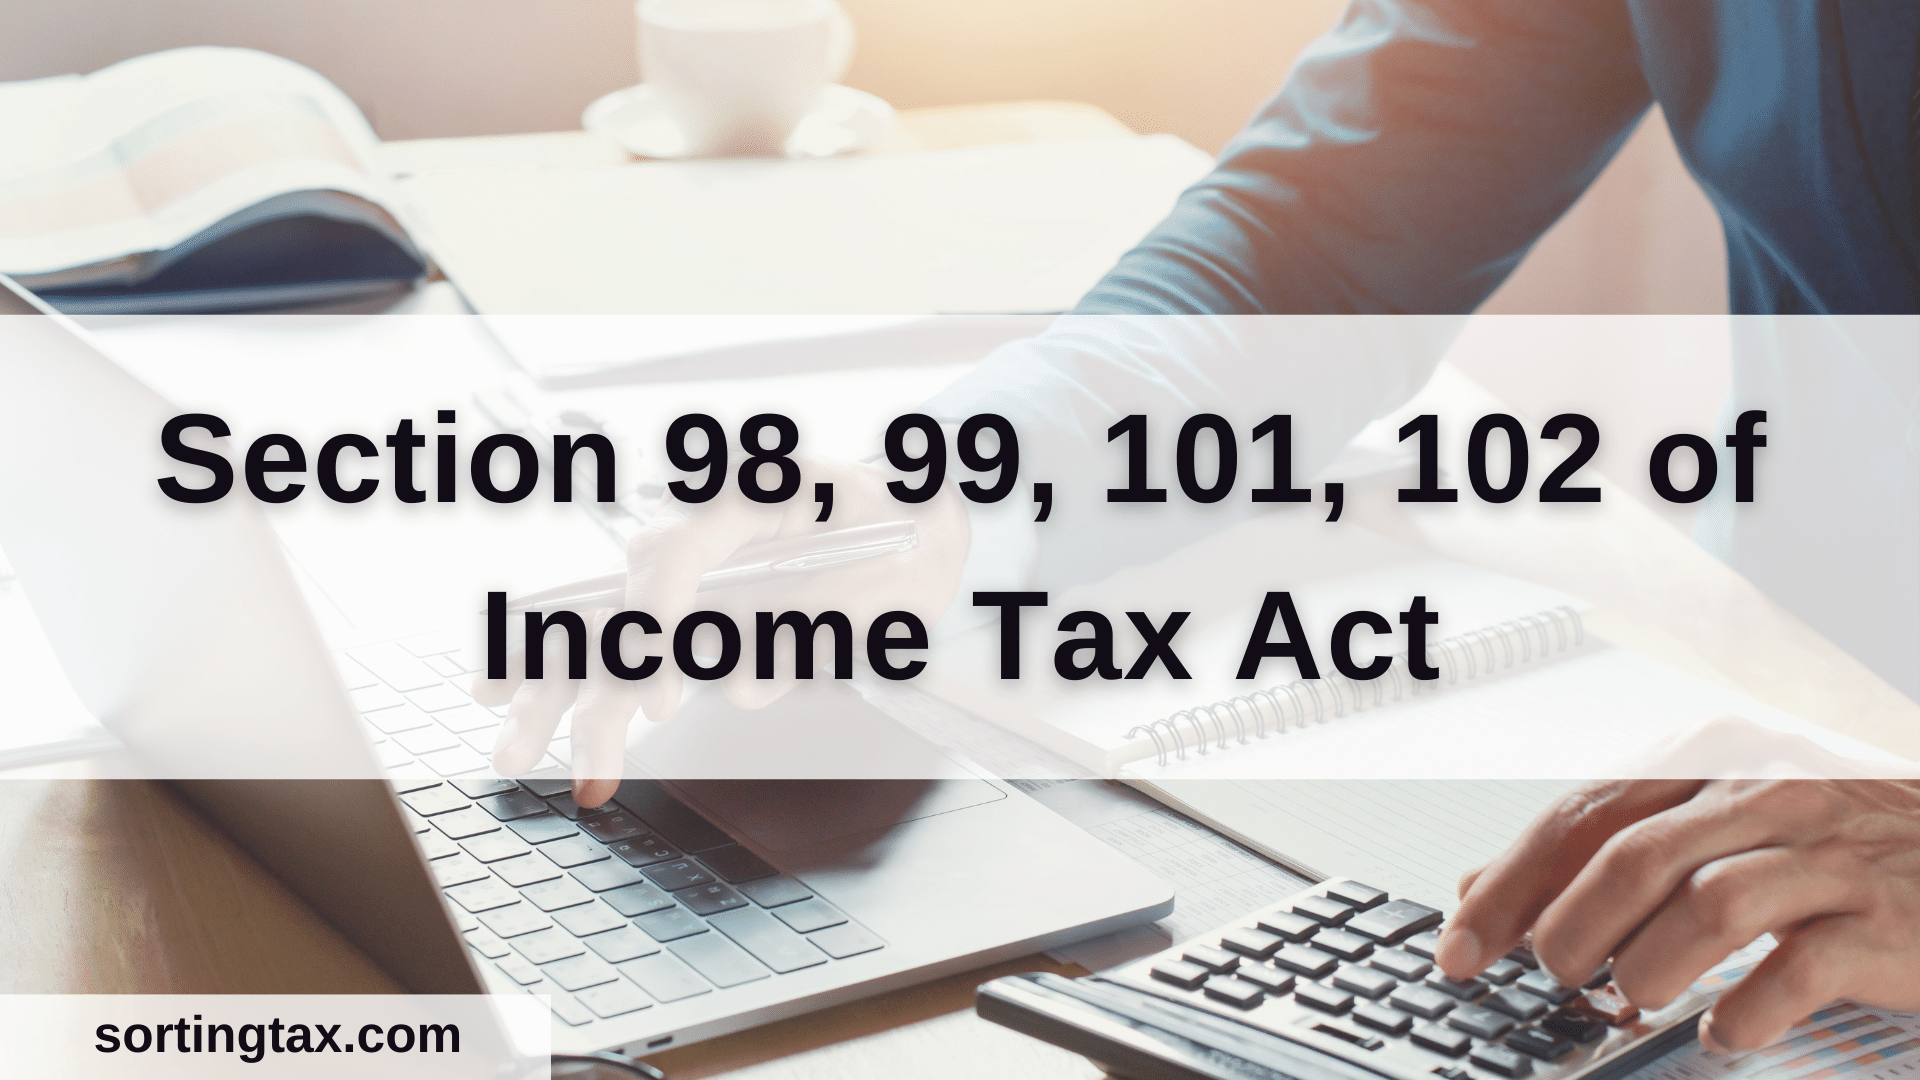 Section 98, 99, 101, 102 of Income Tax Act